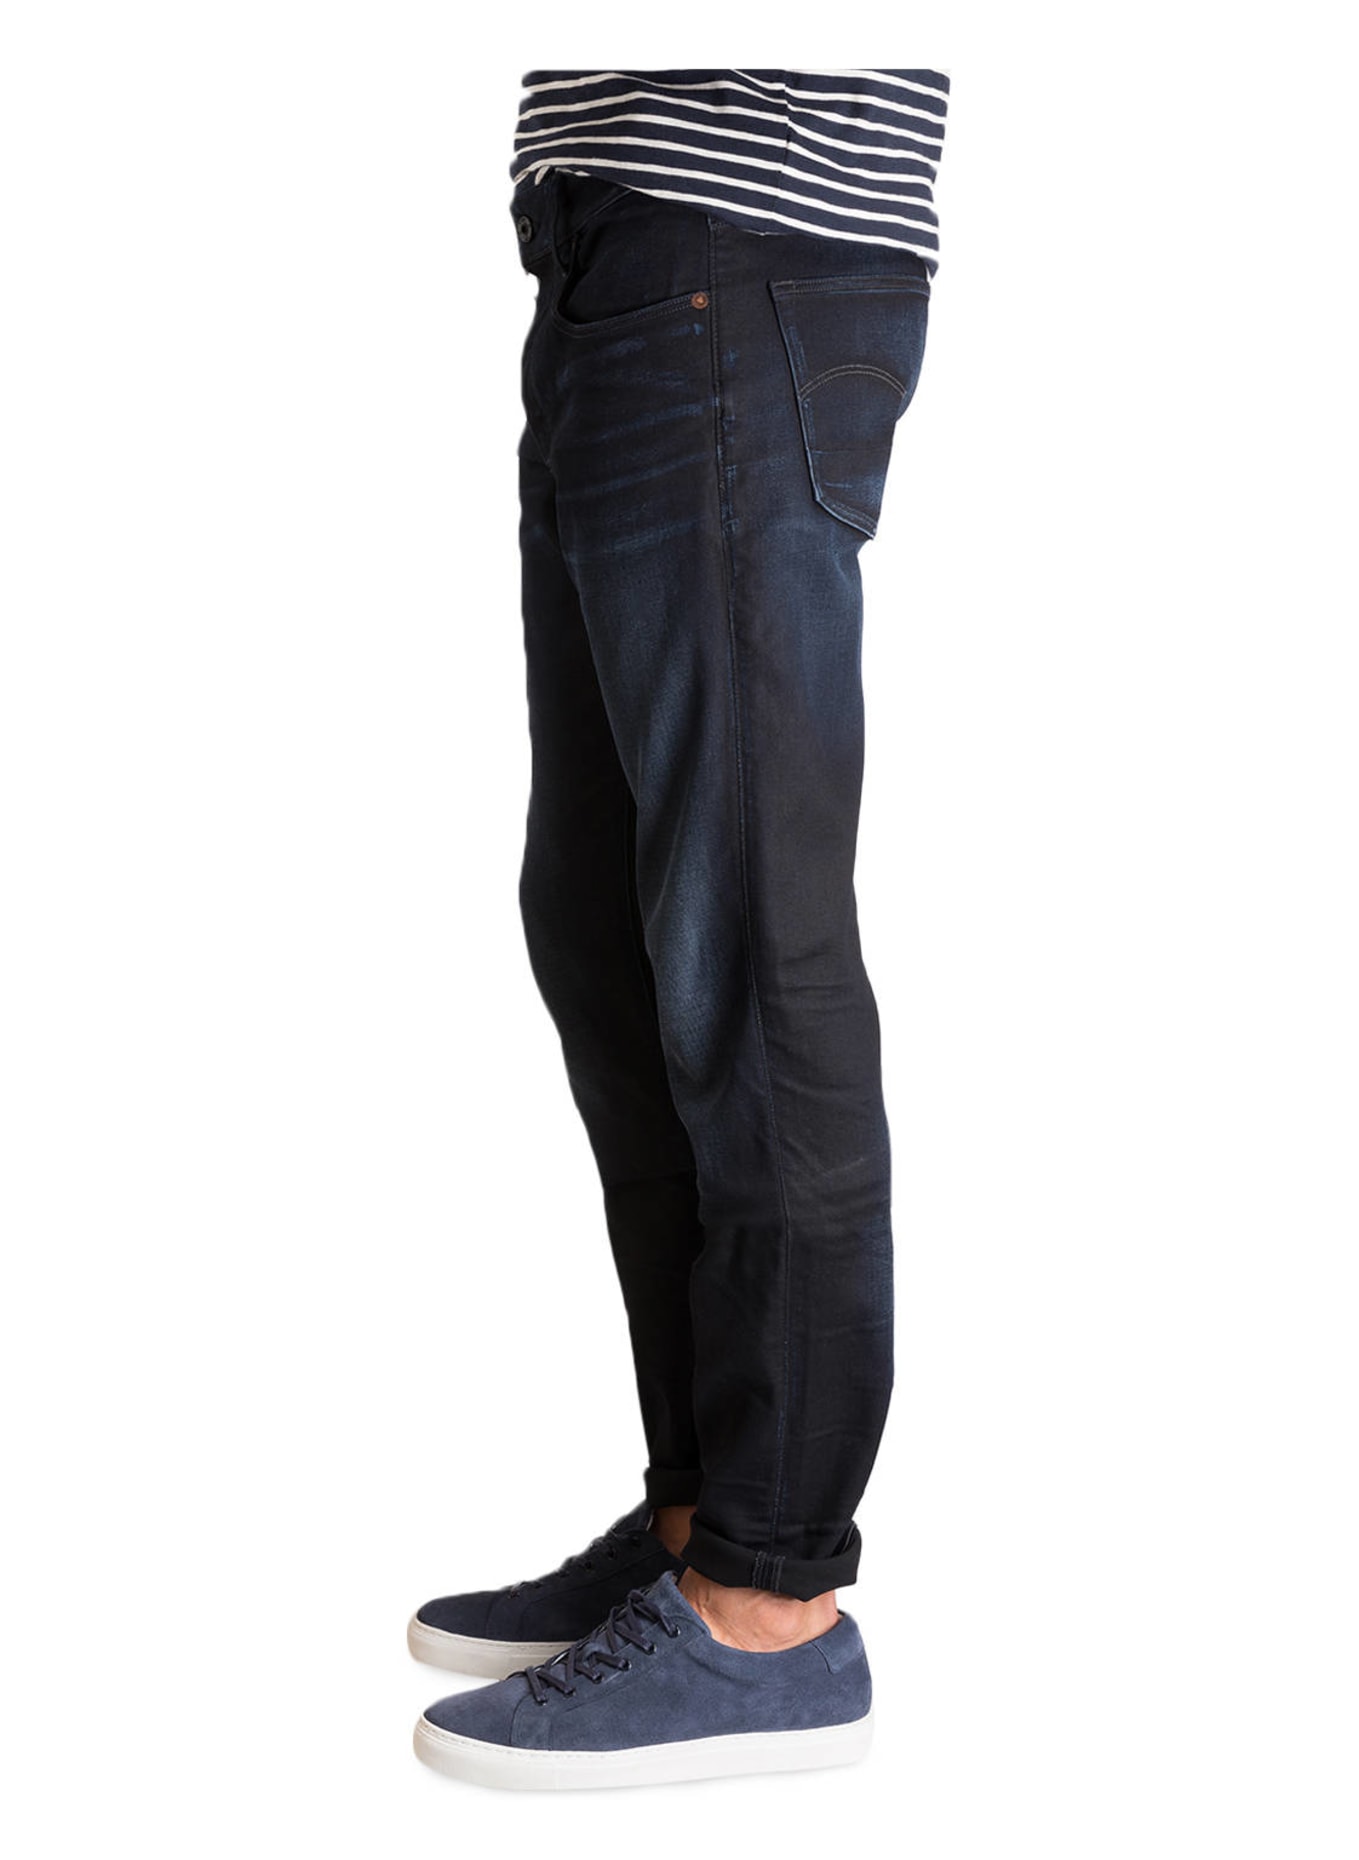 G-Star RAW Jeans 3301 slim fit, Color: 89 DK AGED (Image 4)